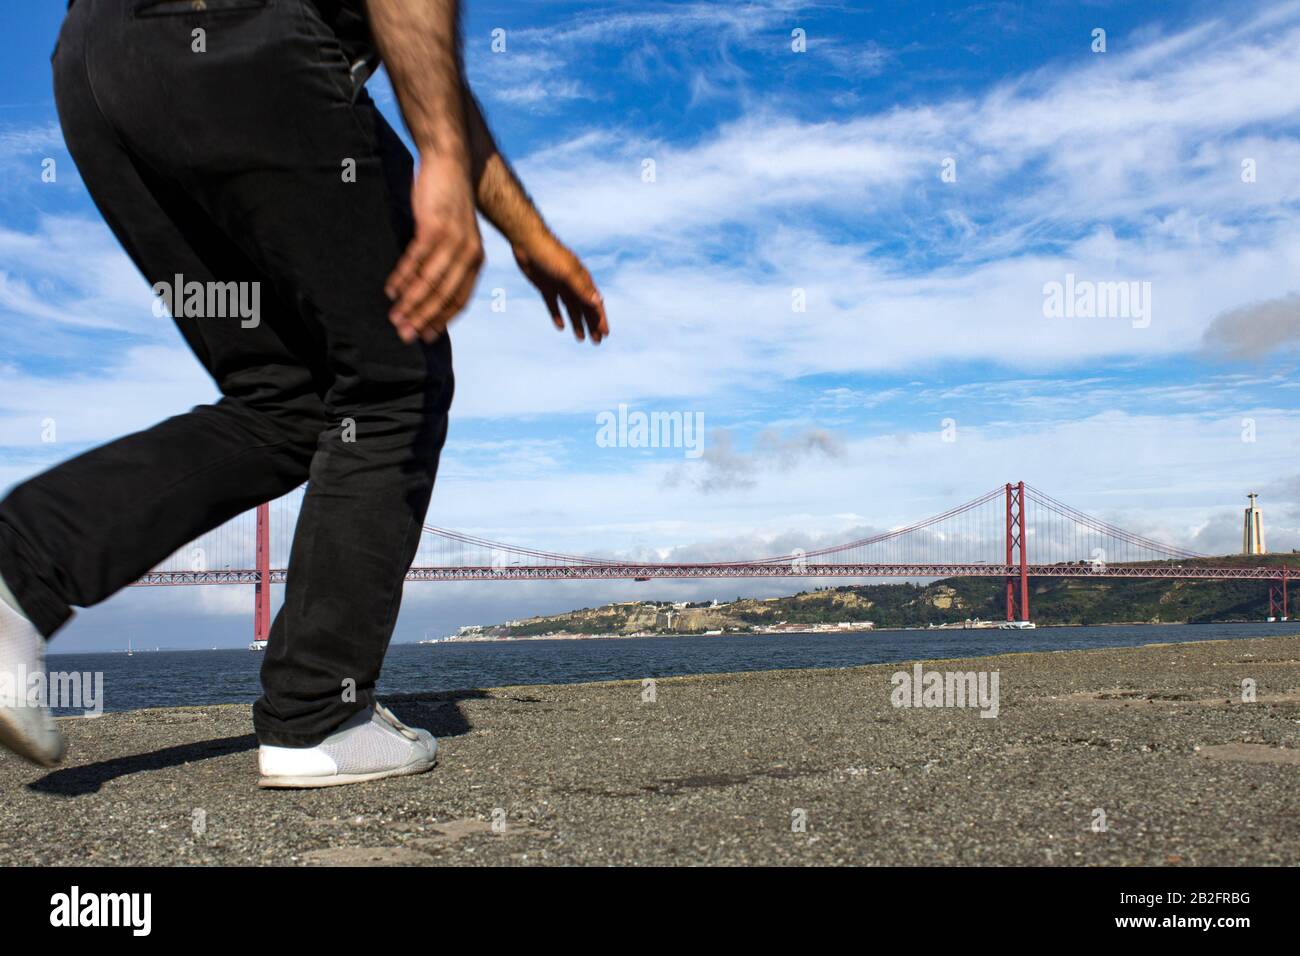 Low angle view image of the Lower half body of a running man seen in front of the 25 de Abril Bridge at Lisbon, Portugal, on a summer day with blue sk Stock Photo